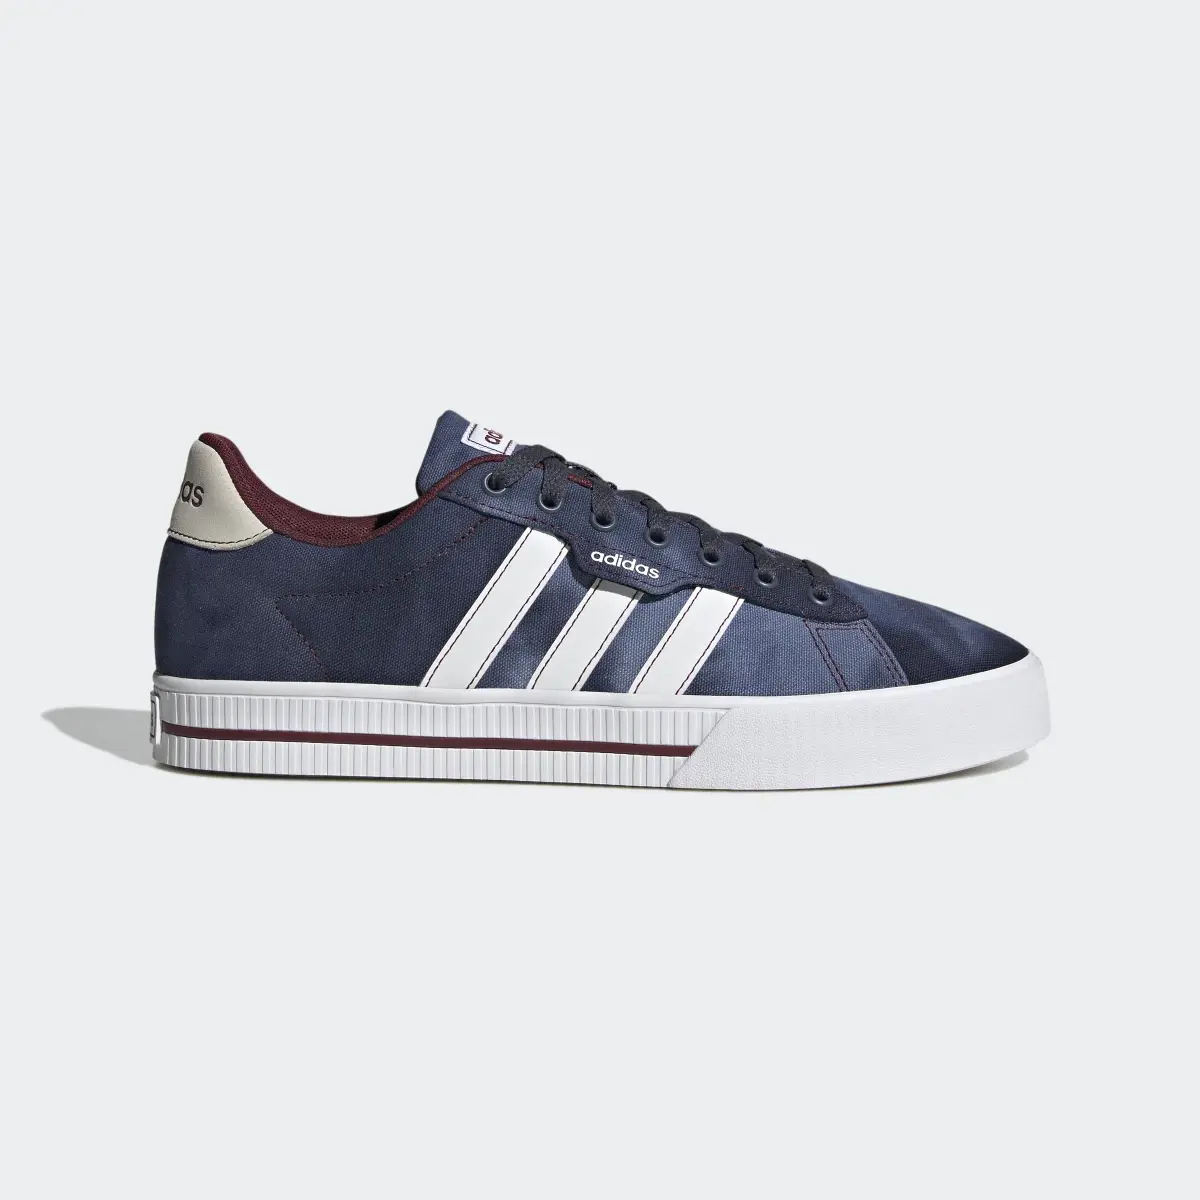 Adidas Daily 3.0 Lifestyle Skateboarding Suede Shoes. 2